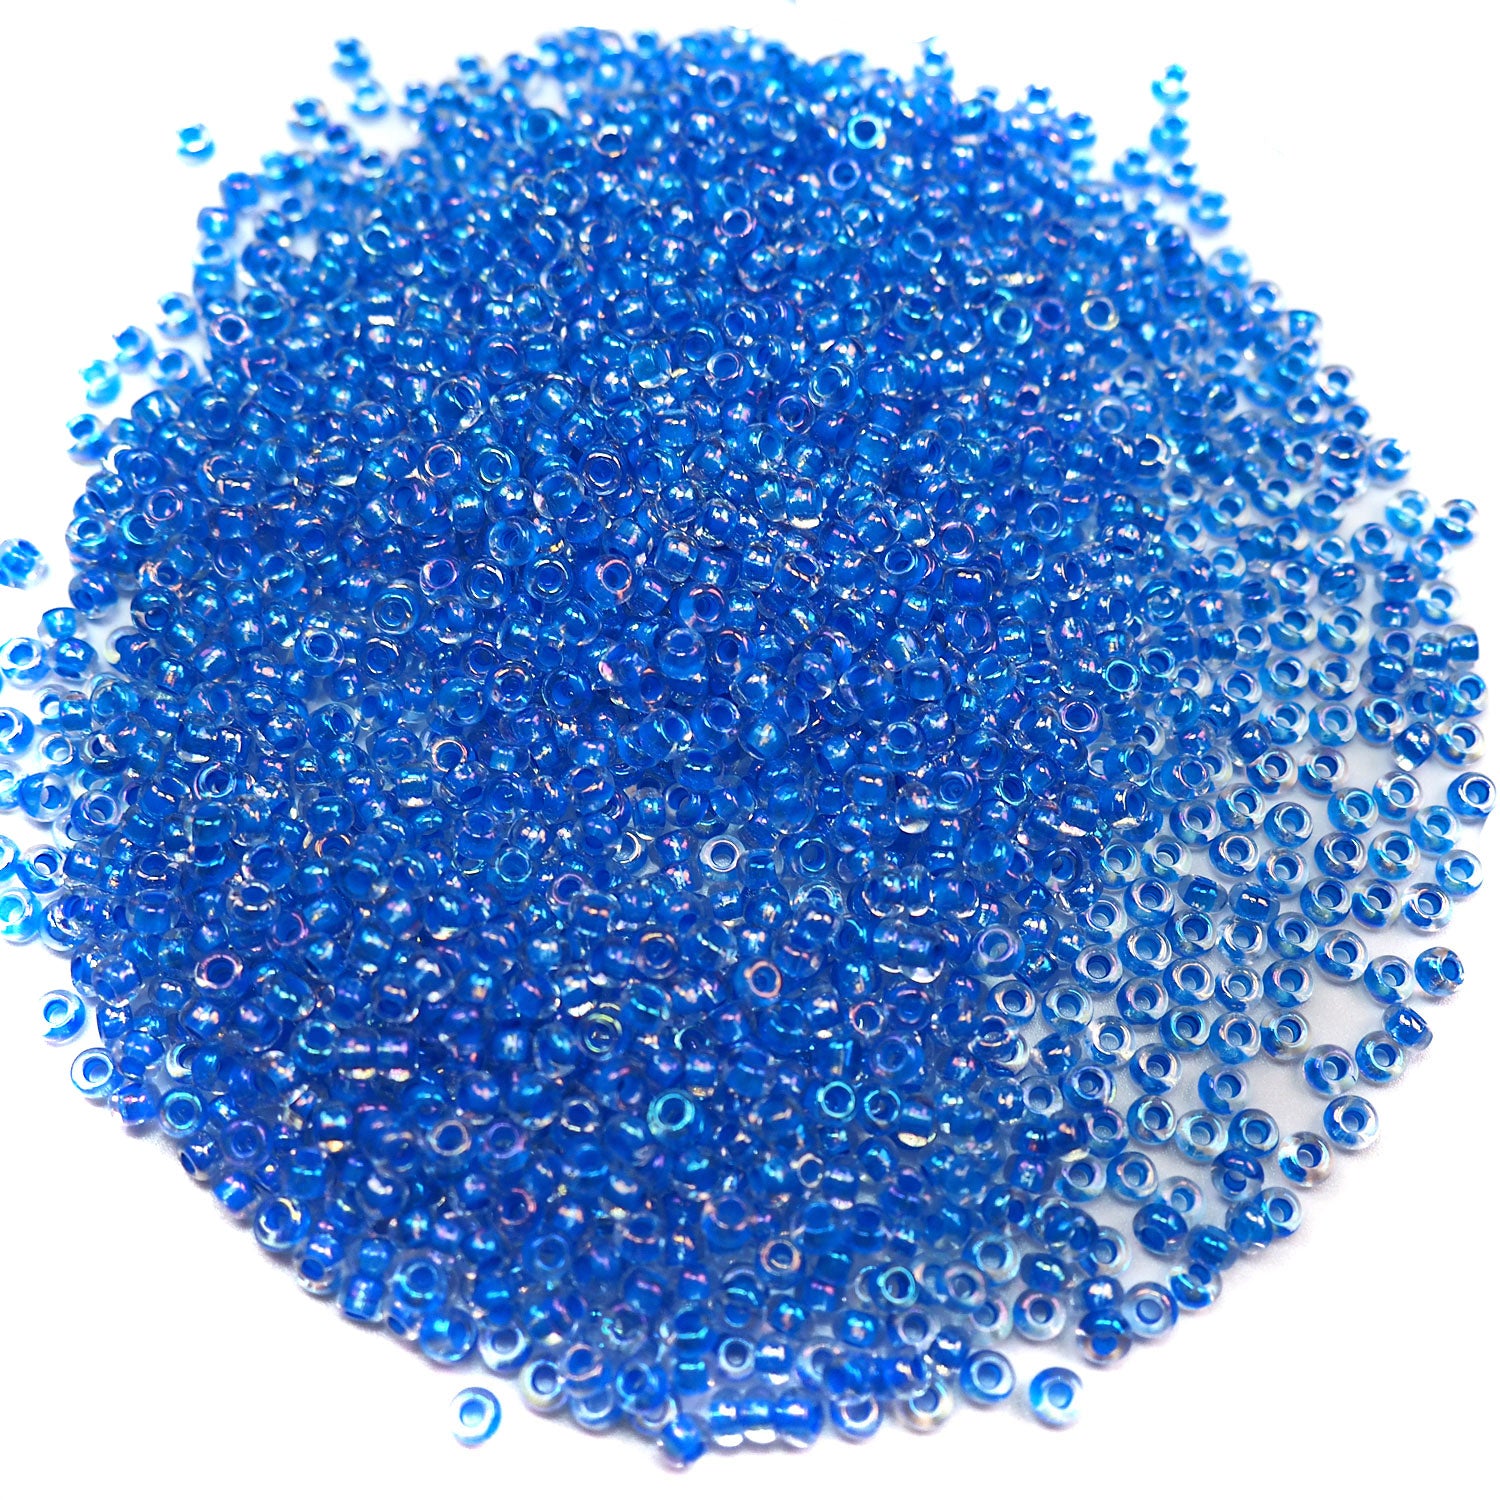 Rocailles size 9/0 (2.6mm) Blue Rainbow Lined, Preciosa Ornela Traditional Czech Glass Seed Beads, 30grams (1 oz), P923